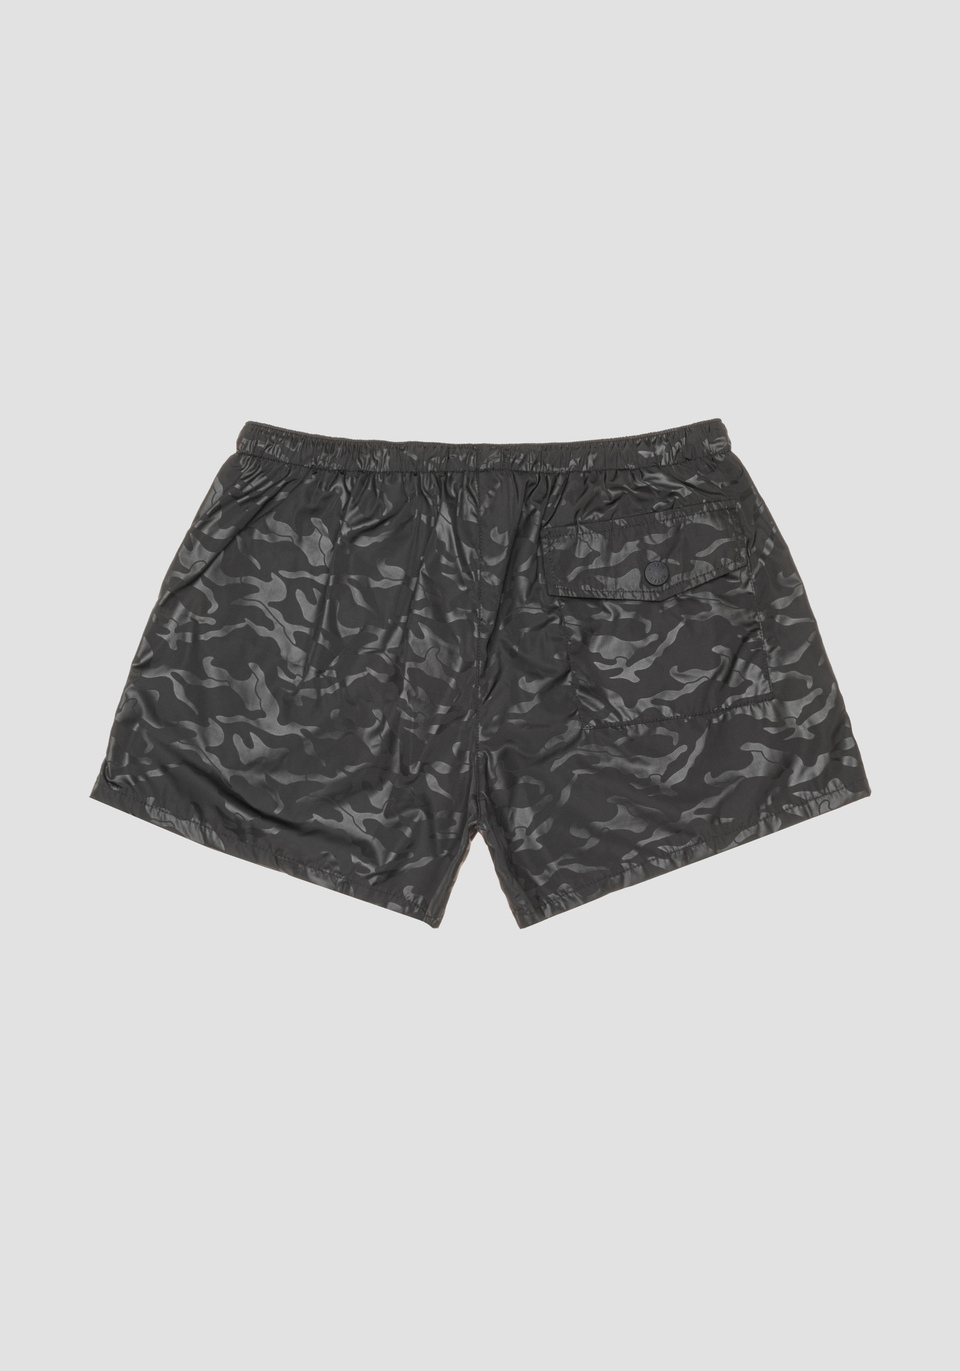 SLIM-FIT SWIMMING TRUNKS WITH TONE-ON-TONE CAMOUFLAGE PRINT - Antony Morato Online Shop